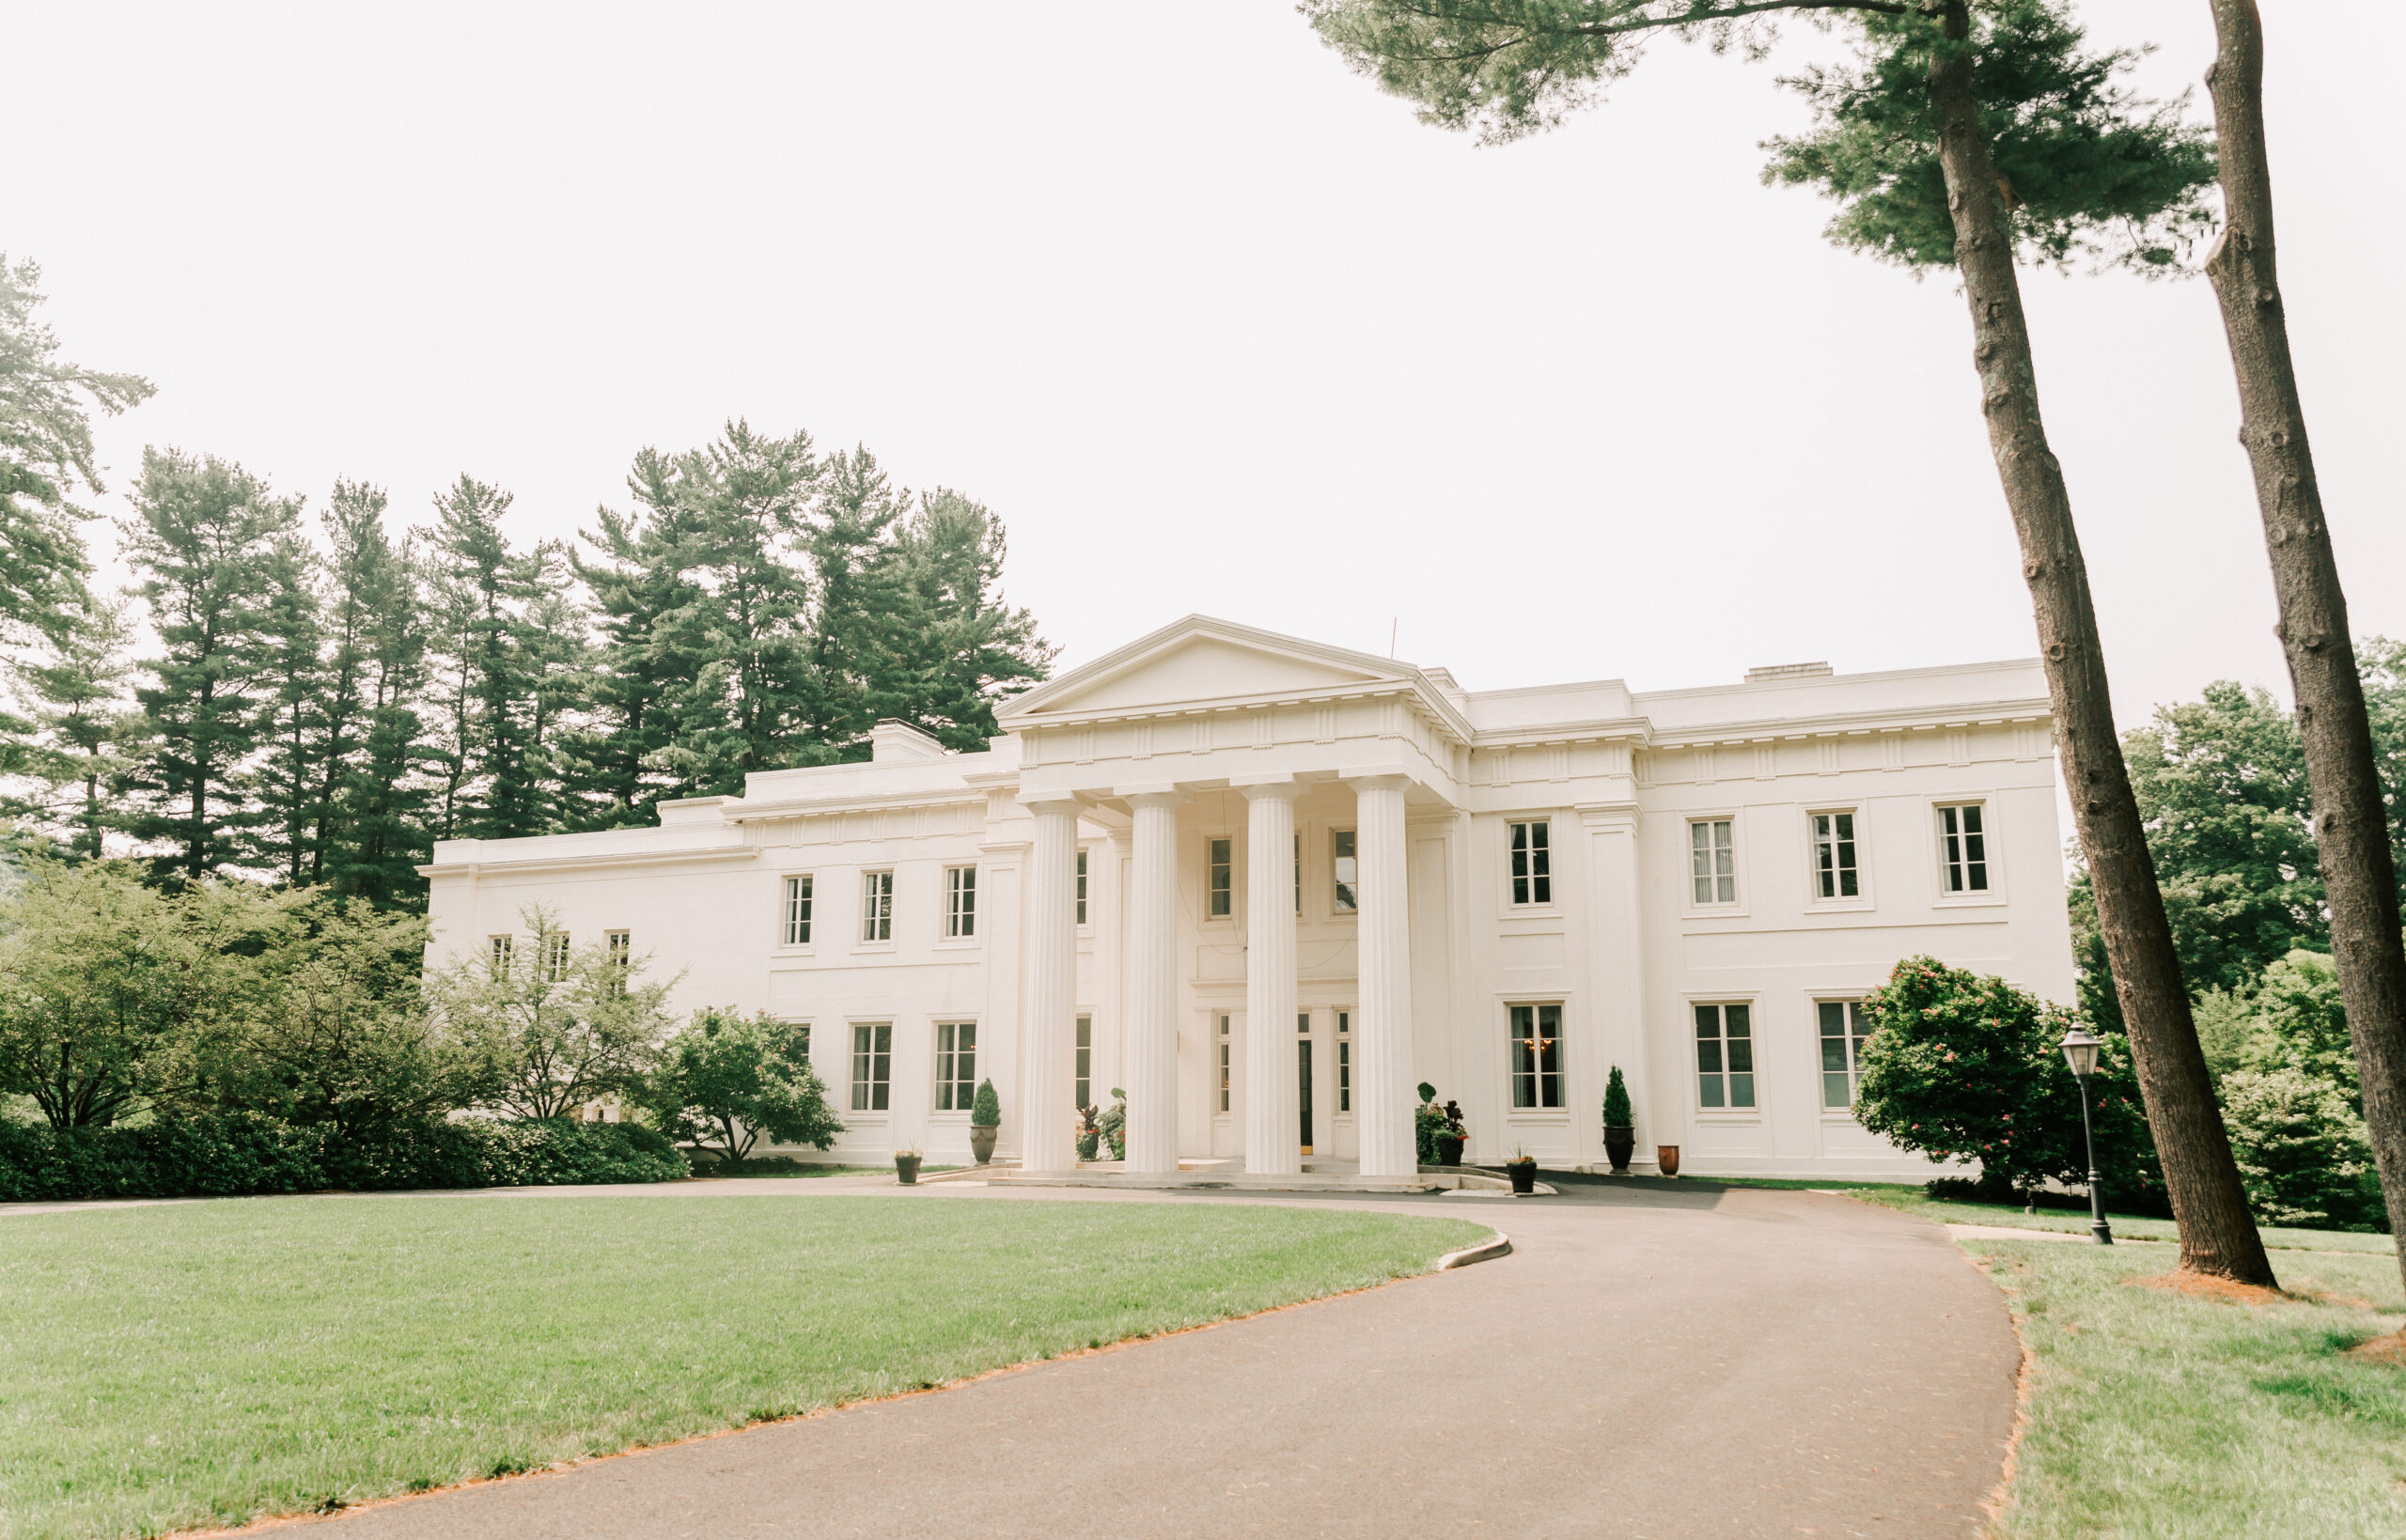 The exterior of Wadsworth Mansion, a stunning wedding venue in Middletown, ct